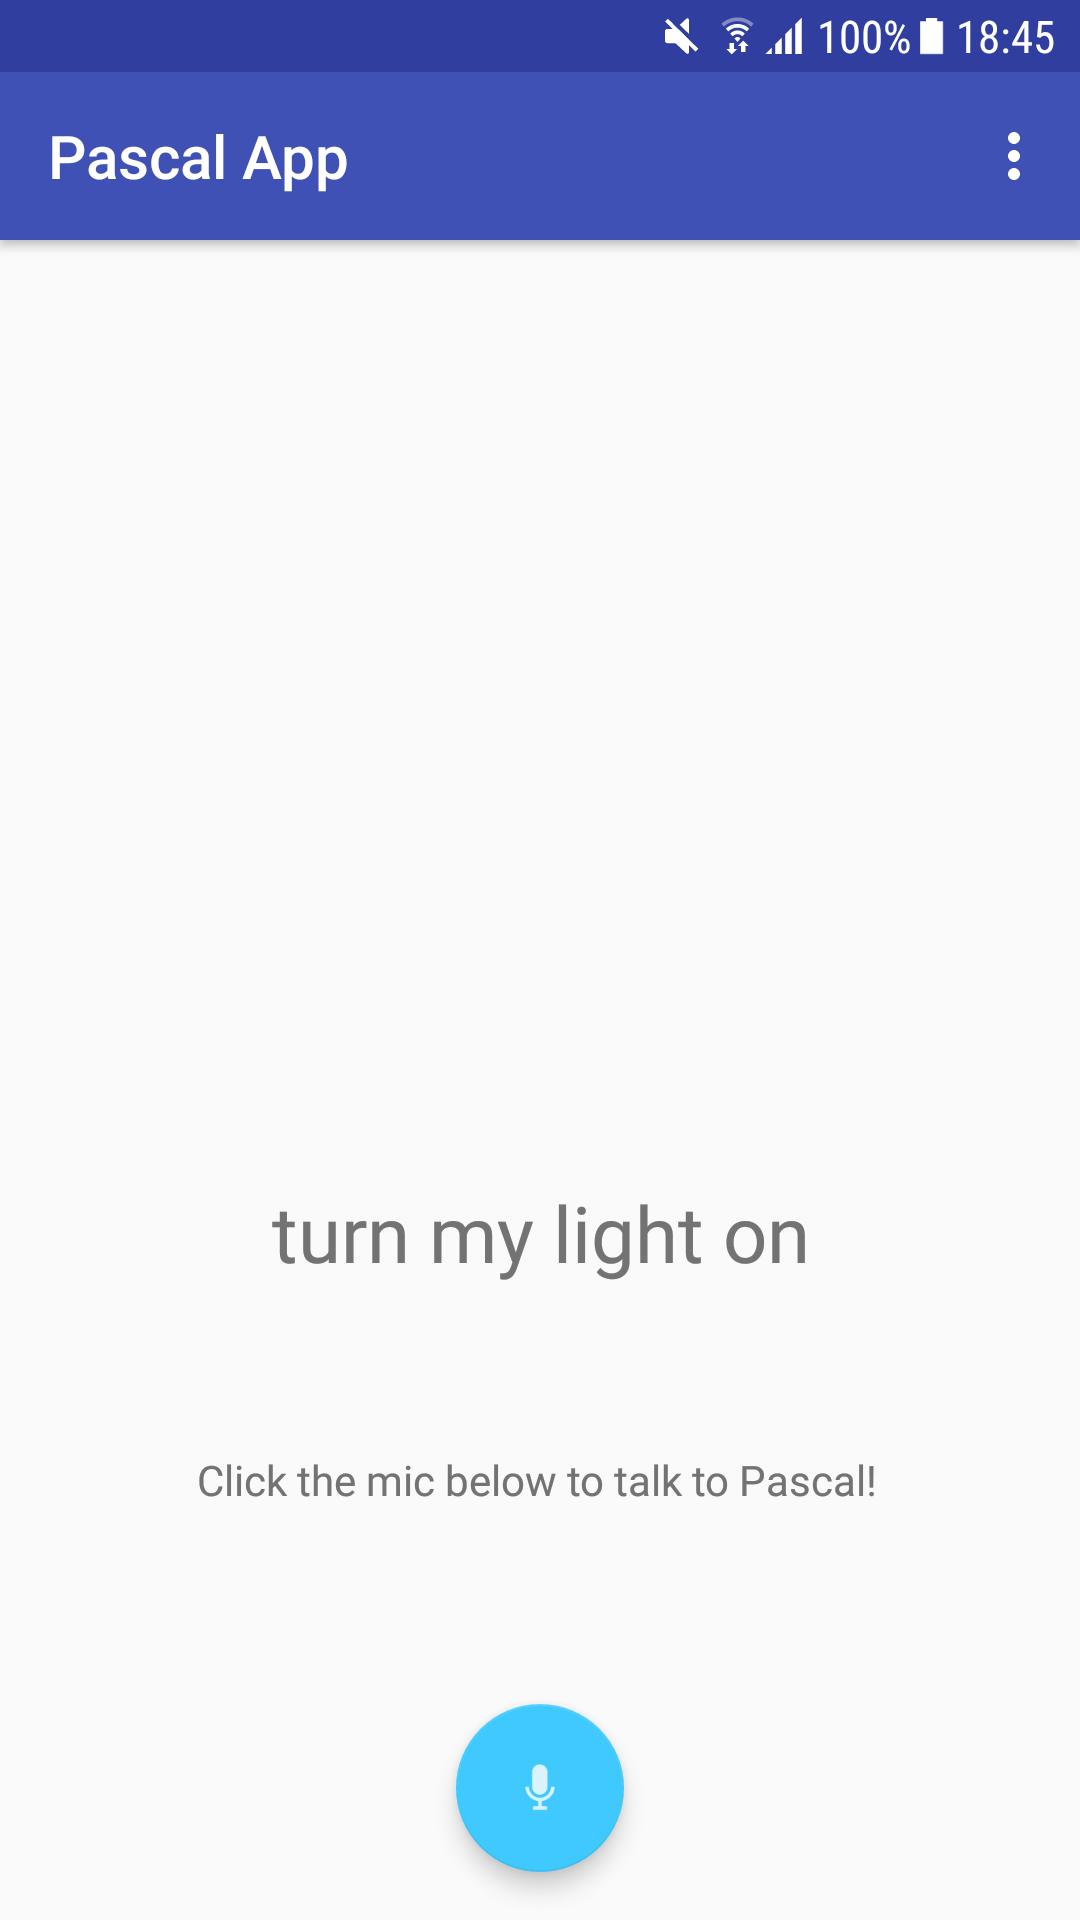 Pascal android. Паскаль на андроид. Pascal applications. Download Pascal on Android.